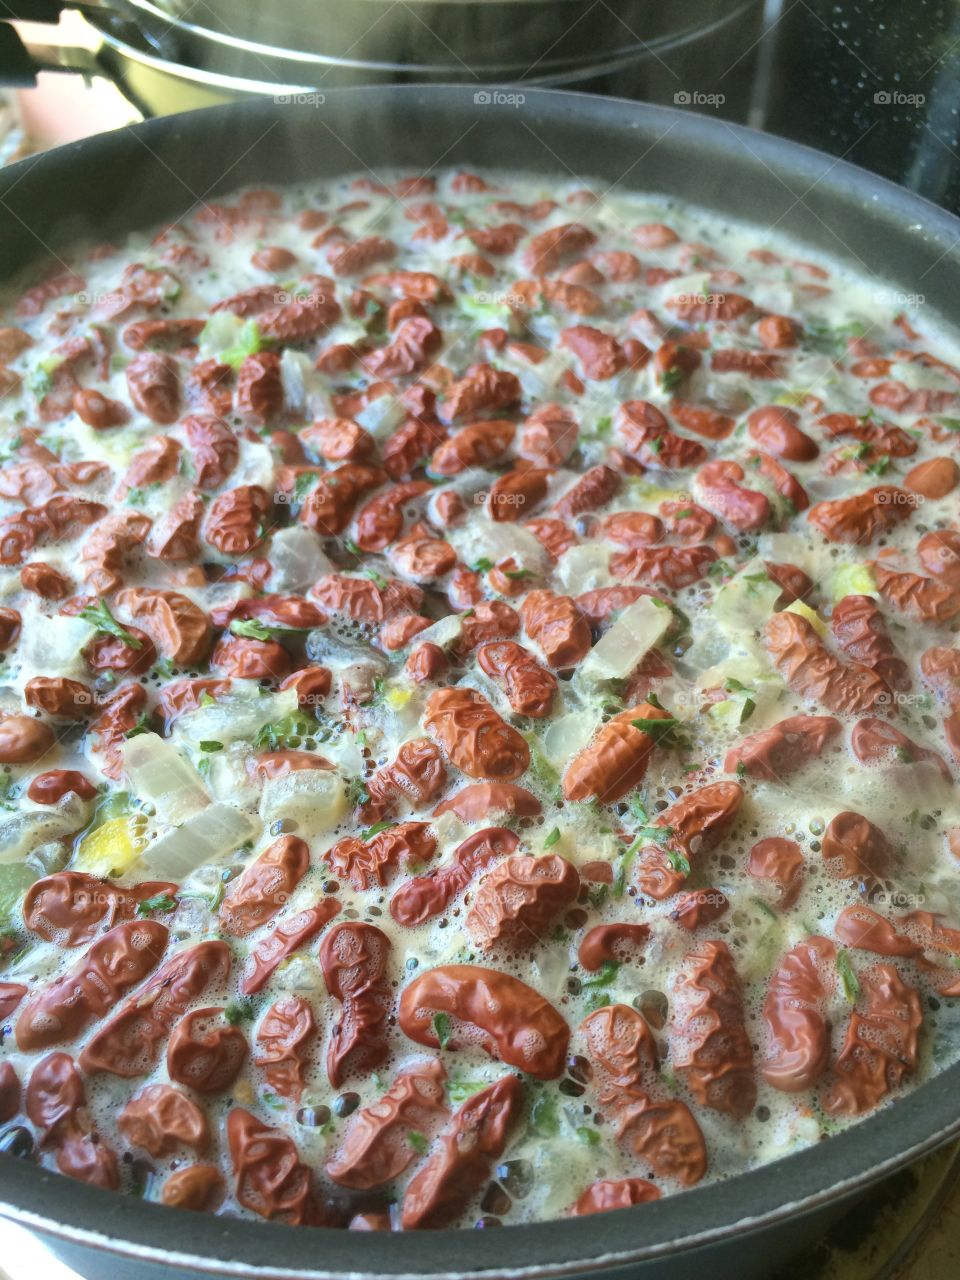 Louisiana red beans in the making. 